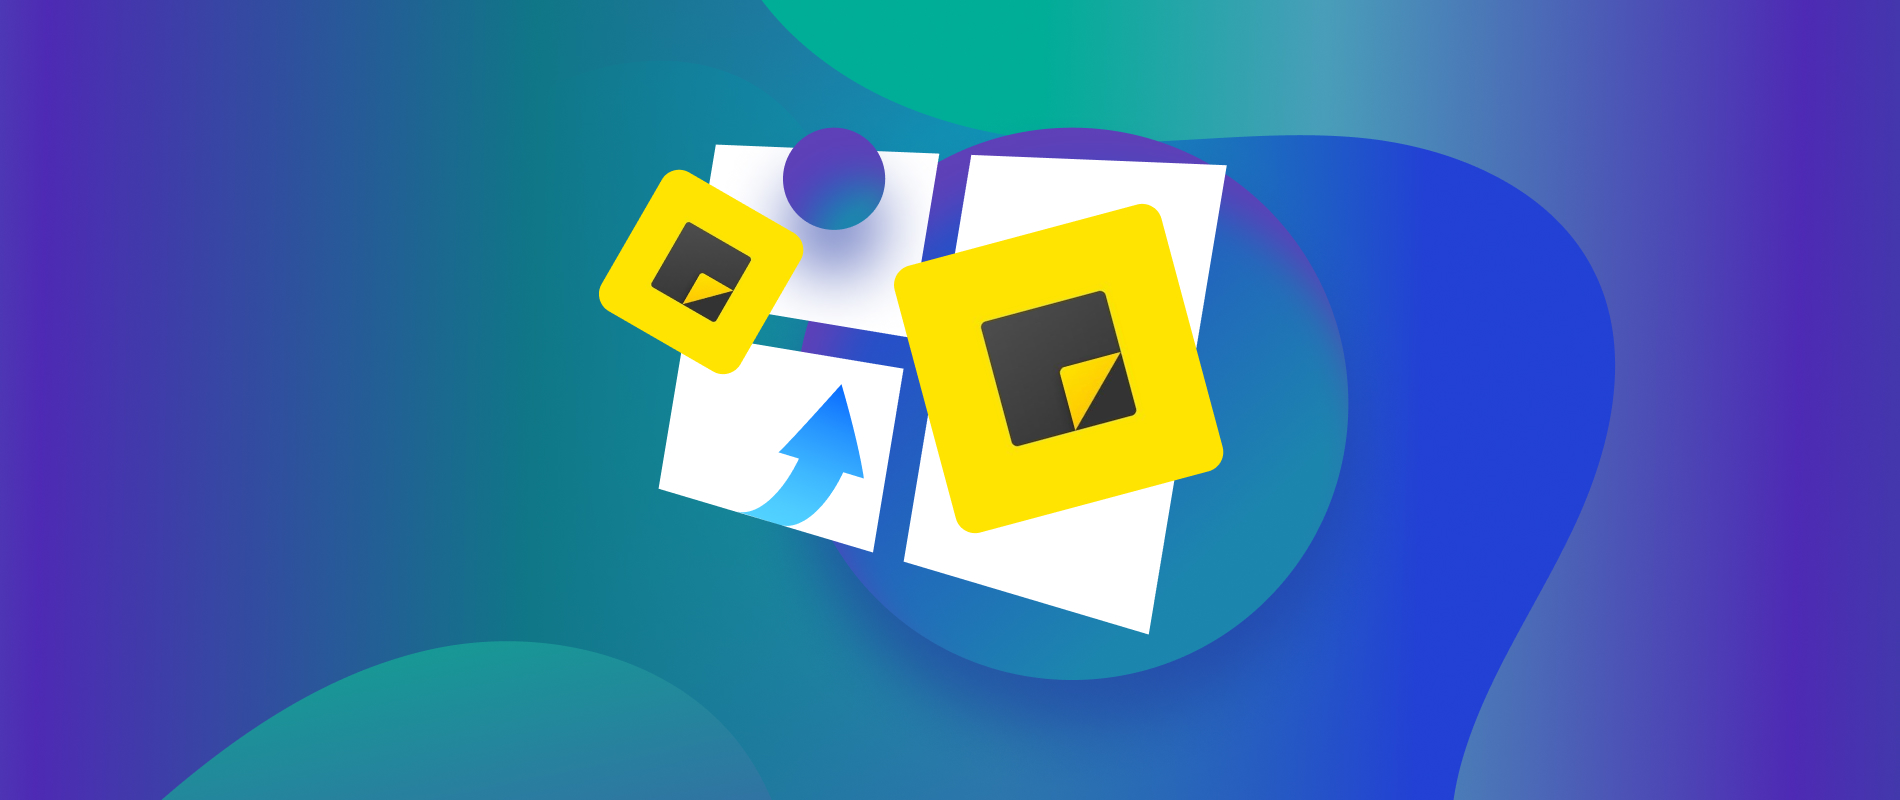 Efterforskning Derfor Tulipaner How to Recover Deleted/Disappeared Sticky Notes on Windows 10